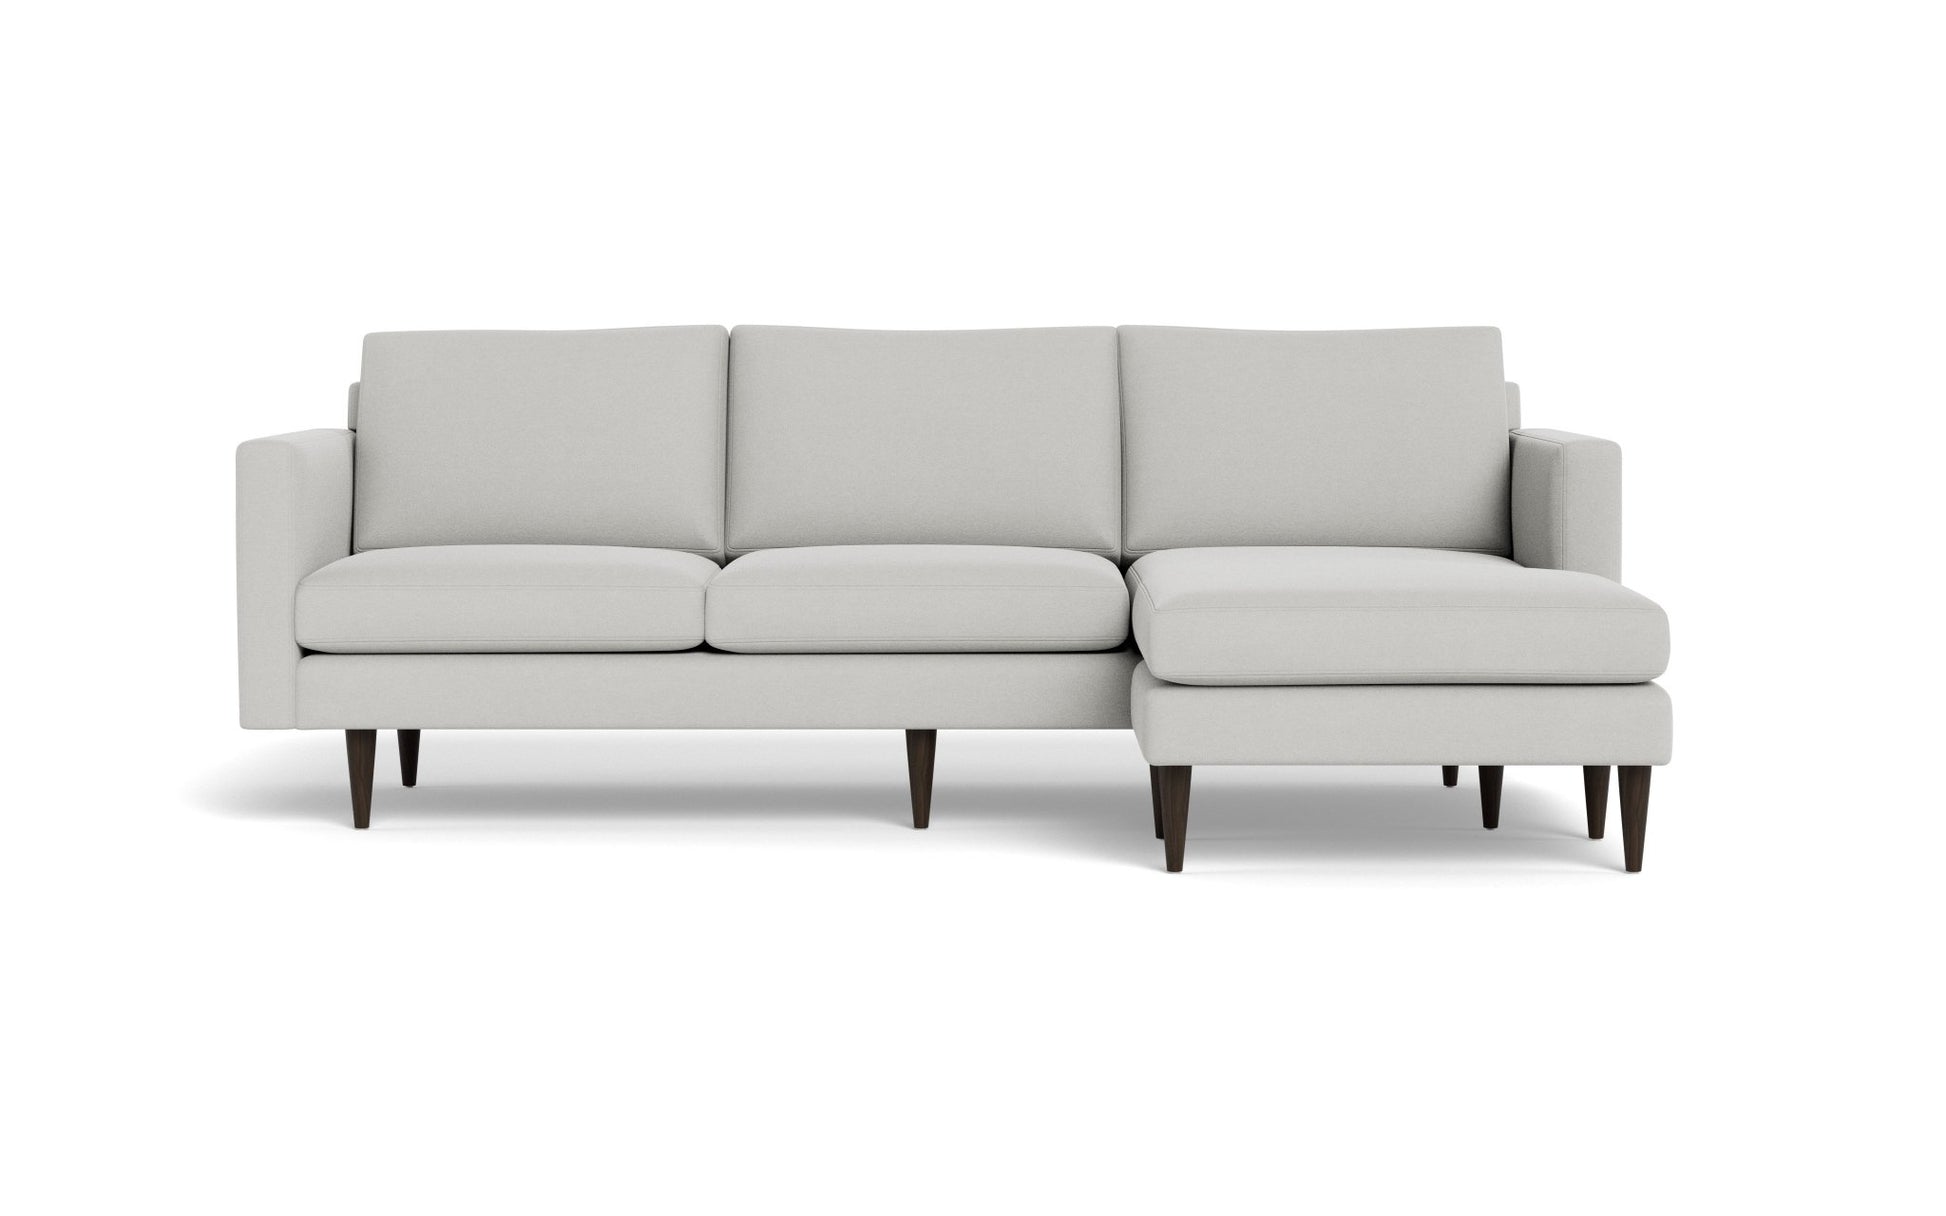 Wallace Untufted Reversible Chaise Sofa - Bella Grey